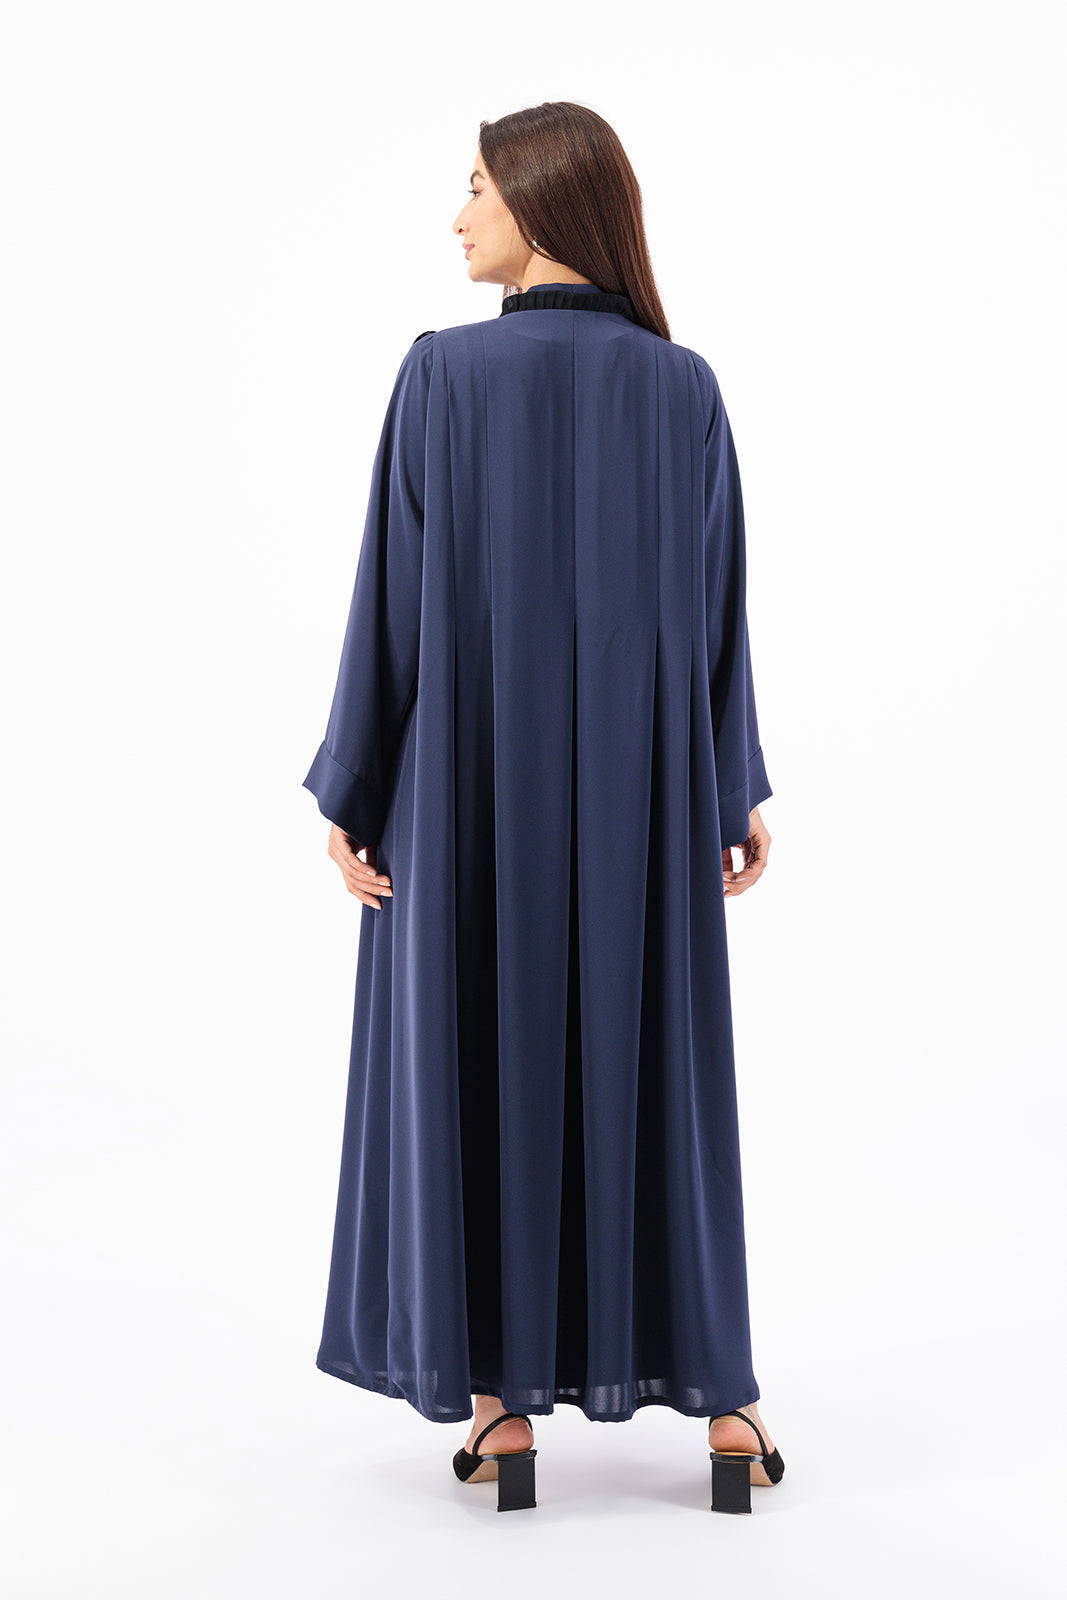 Contrast asymmetrical front ruffled with back pleated abaya